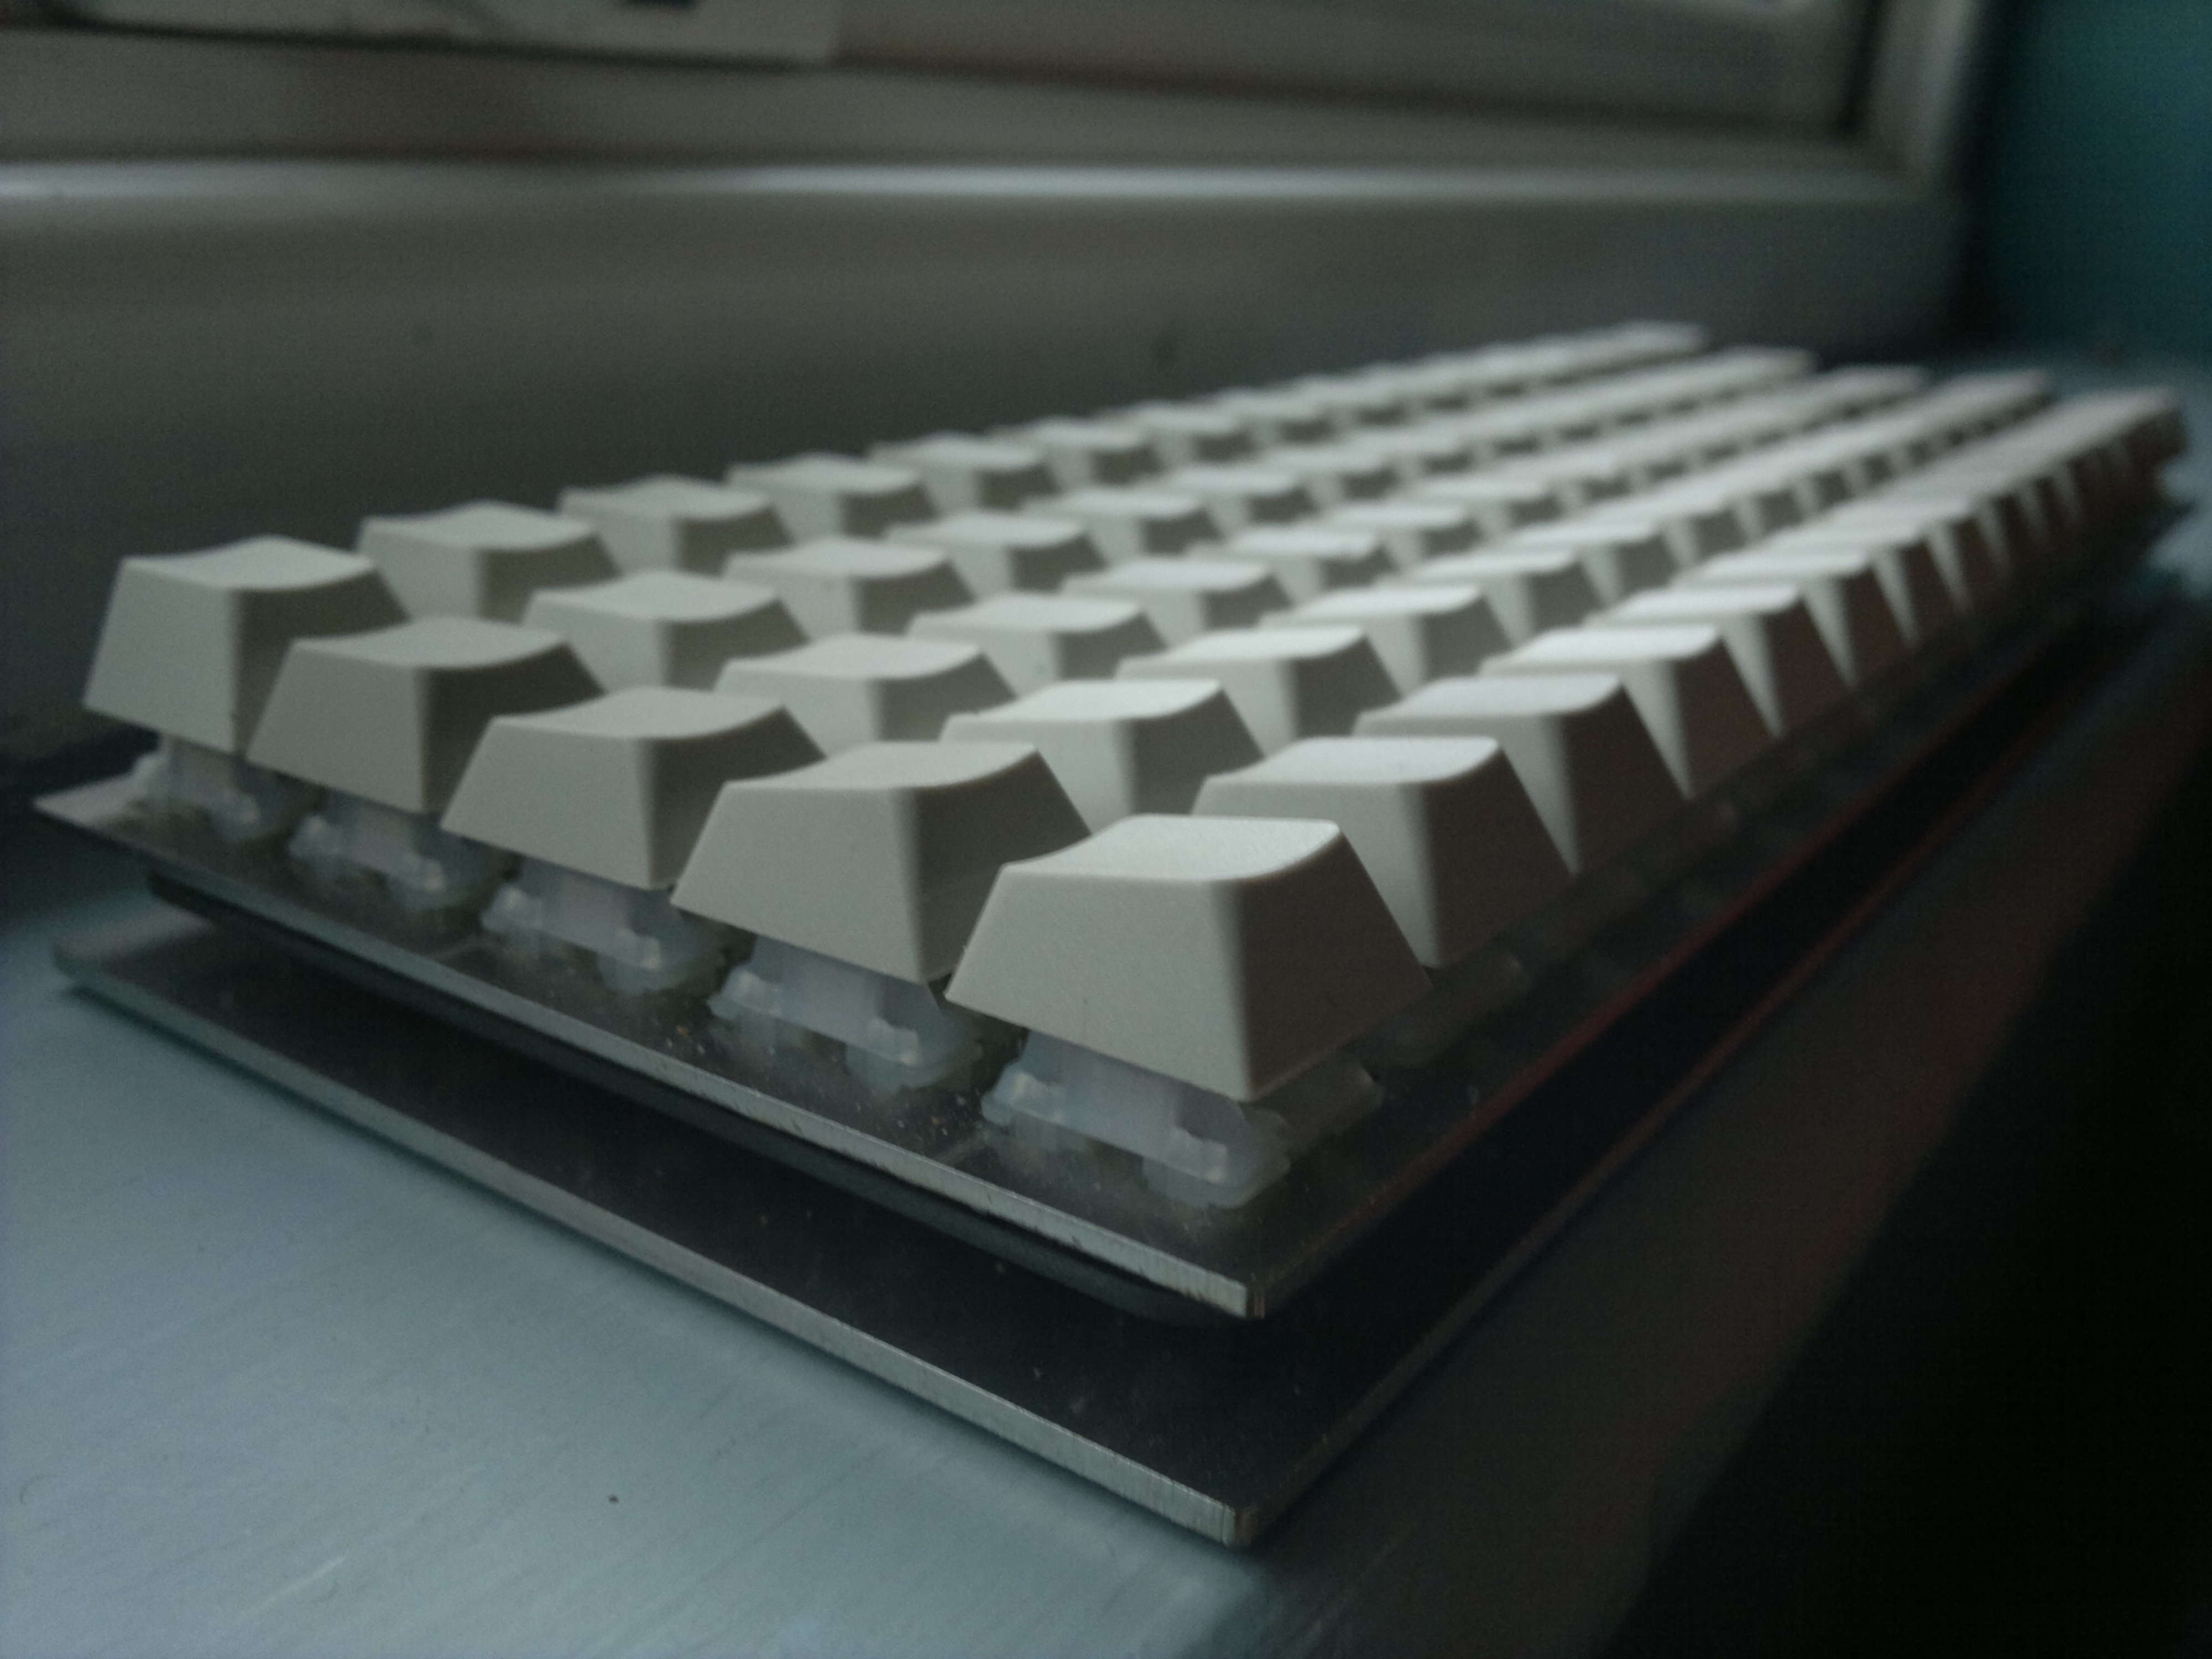 The Atomic Ortholinear Keyboard From the side